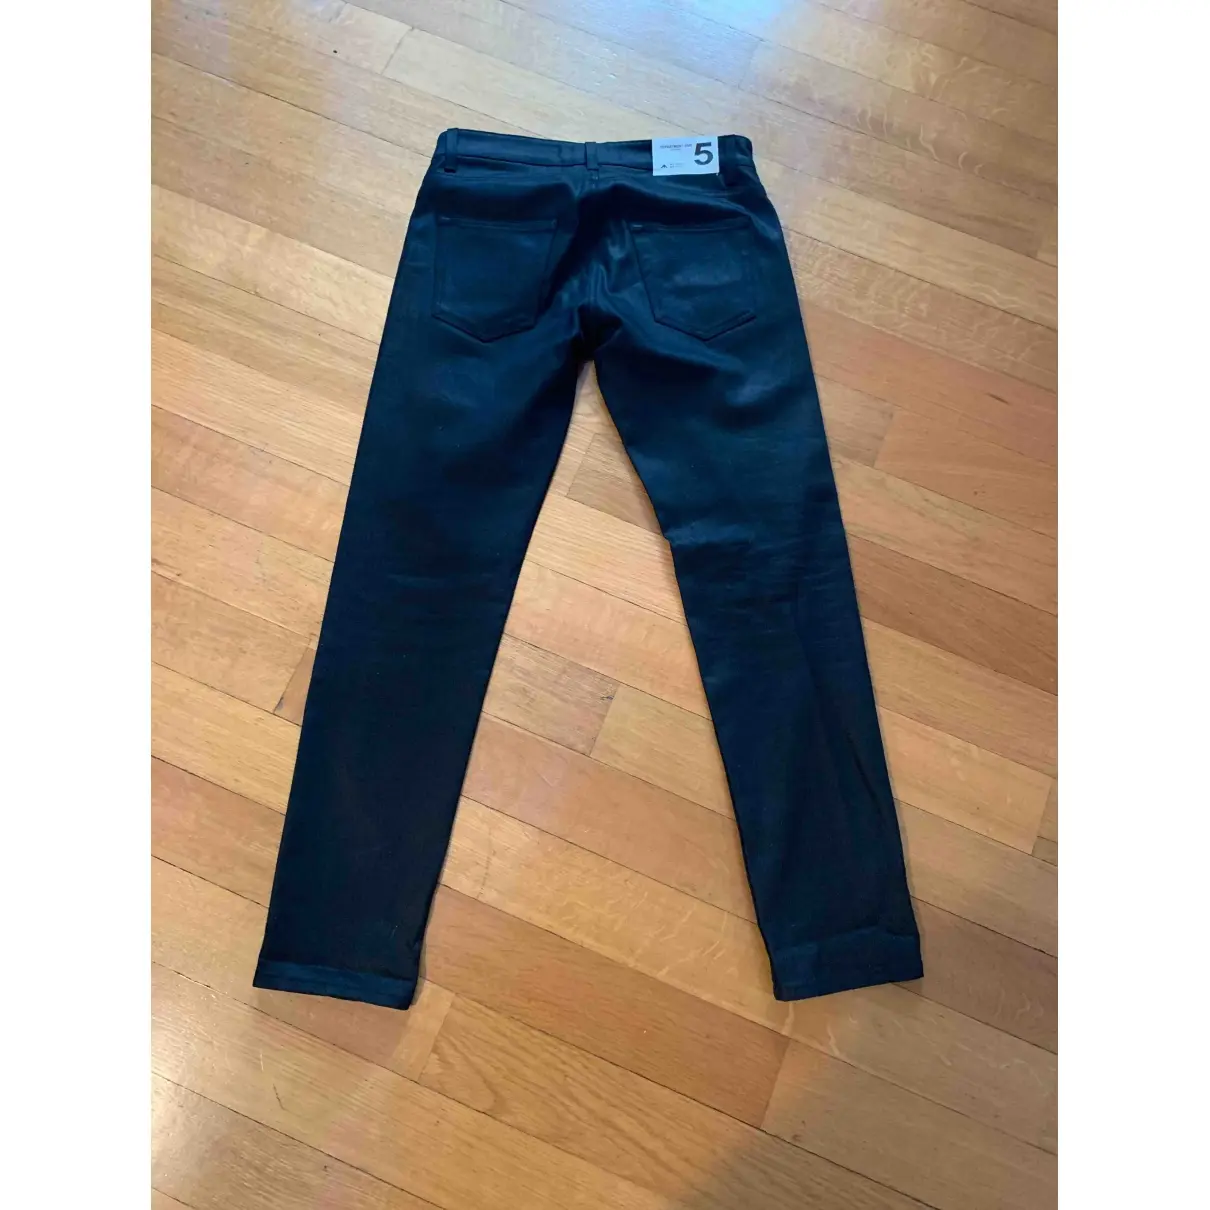 Department 5 Straight jeans for sale